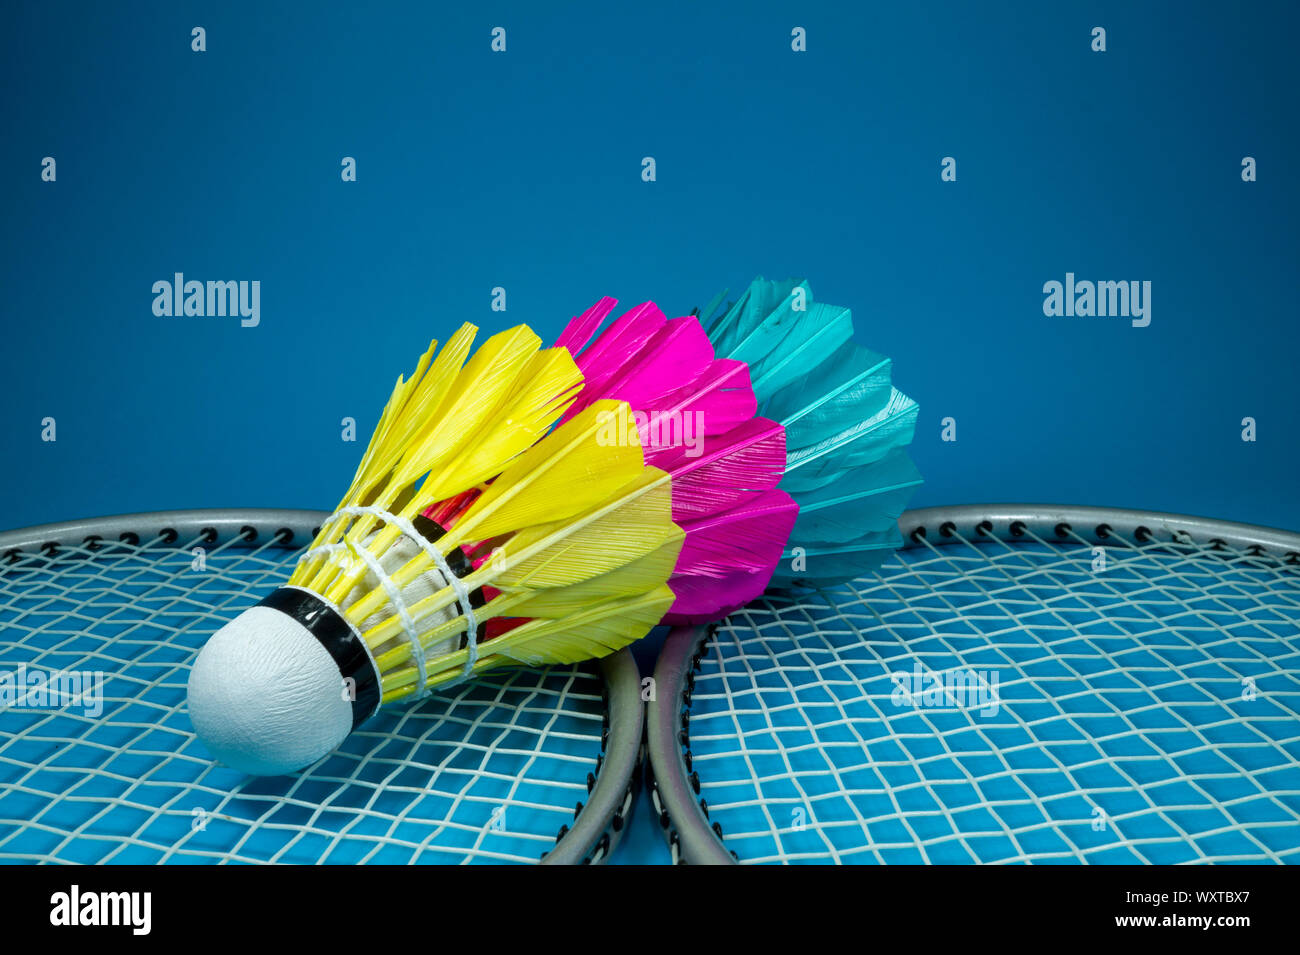 Colorful feathered shuttlecocks in blue, yellow and pink and badminton  rackets on blue background in a close up view Stock Photo - Alamy